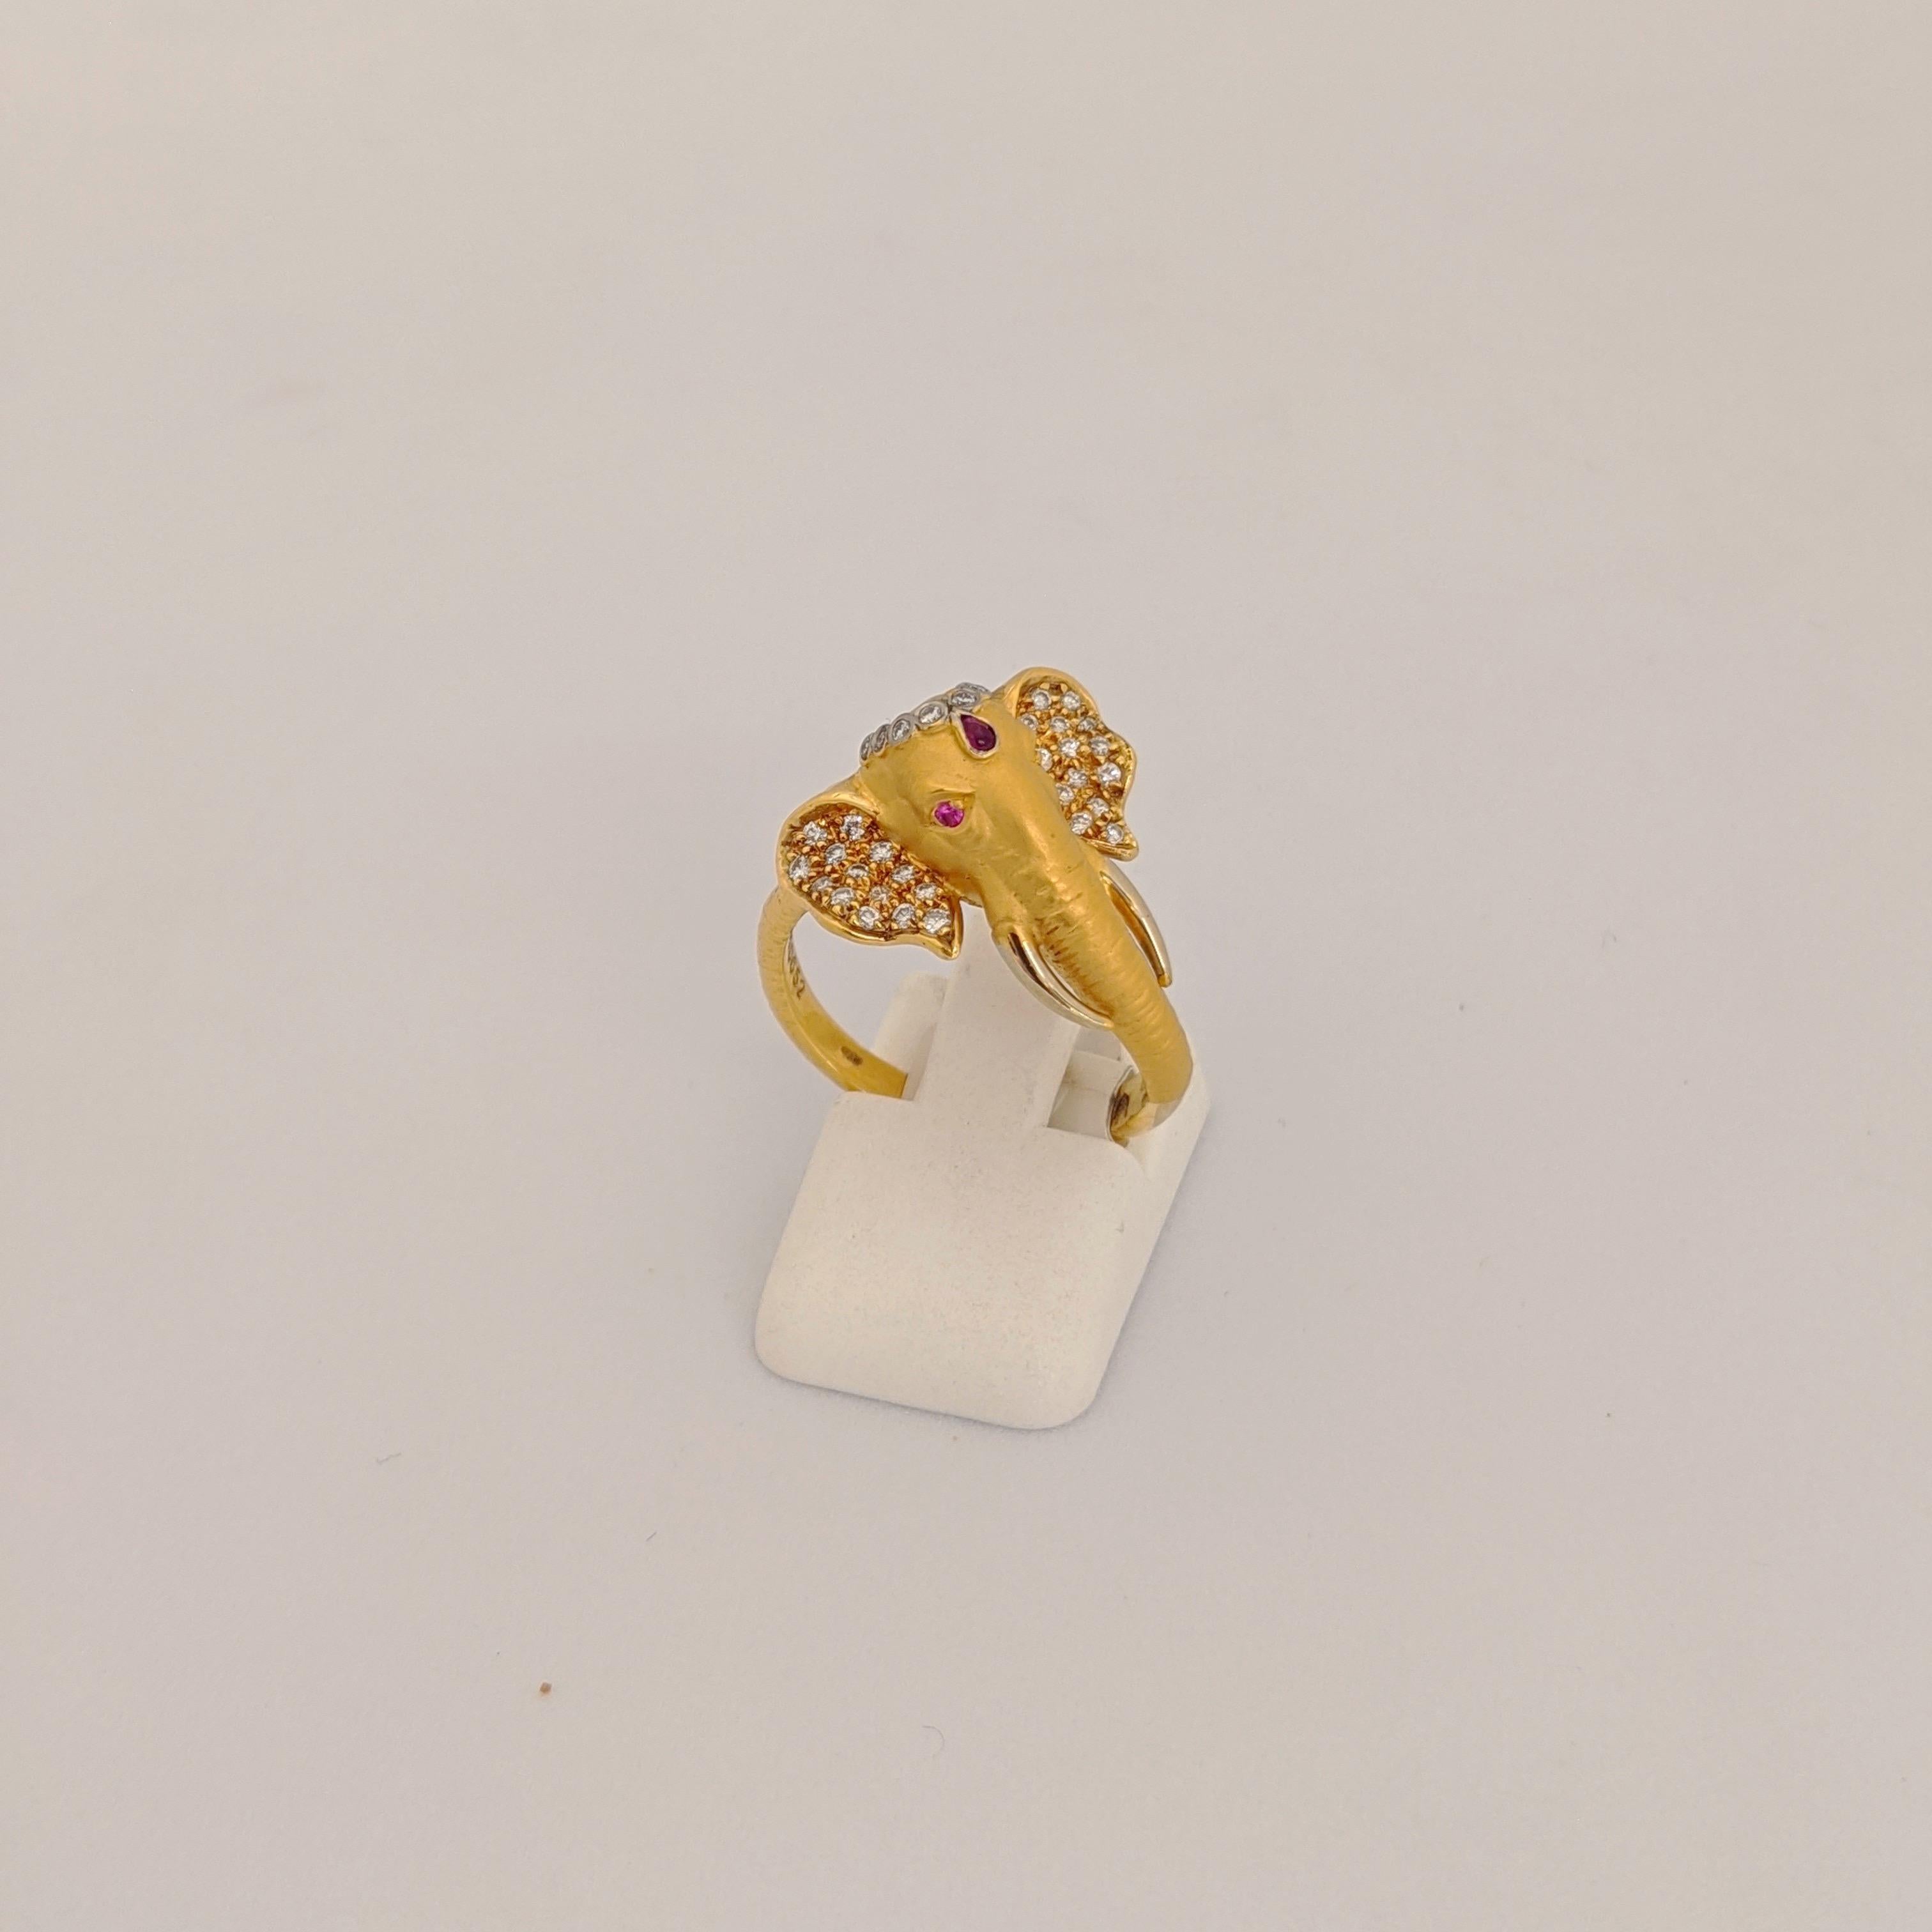 Carrera Y Carrera has built its famous name on figurative designs, an obsession with surface finishes, and a compelling way of seeing beauty in art and nature. This 18 karat yellow gold ring is a perfect example of Carrera's iconic designs. The ring